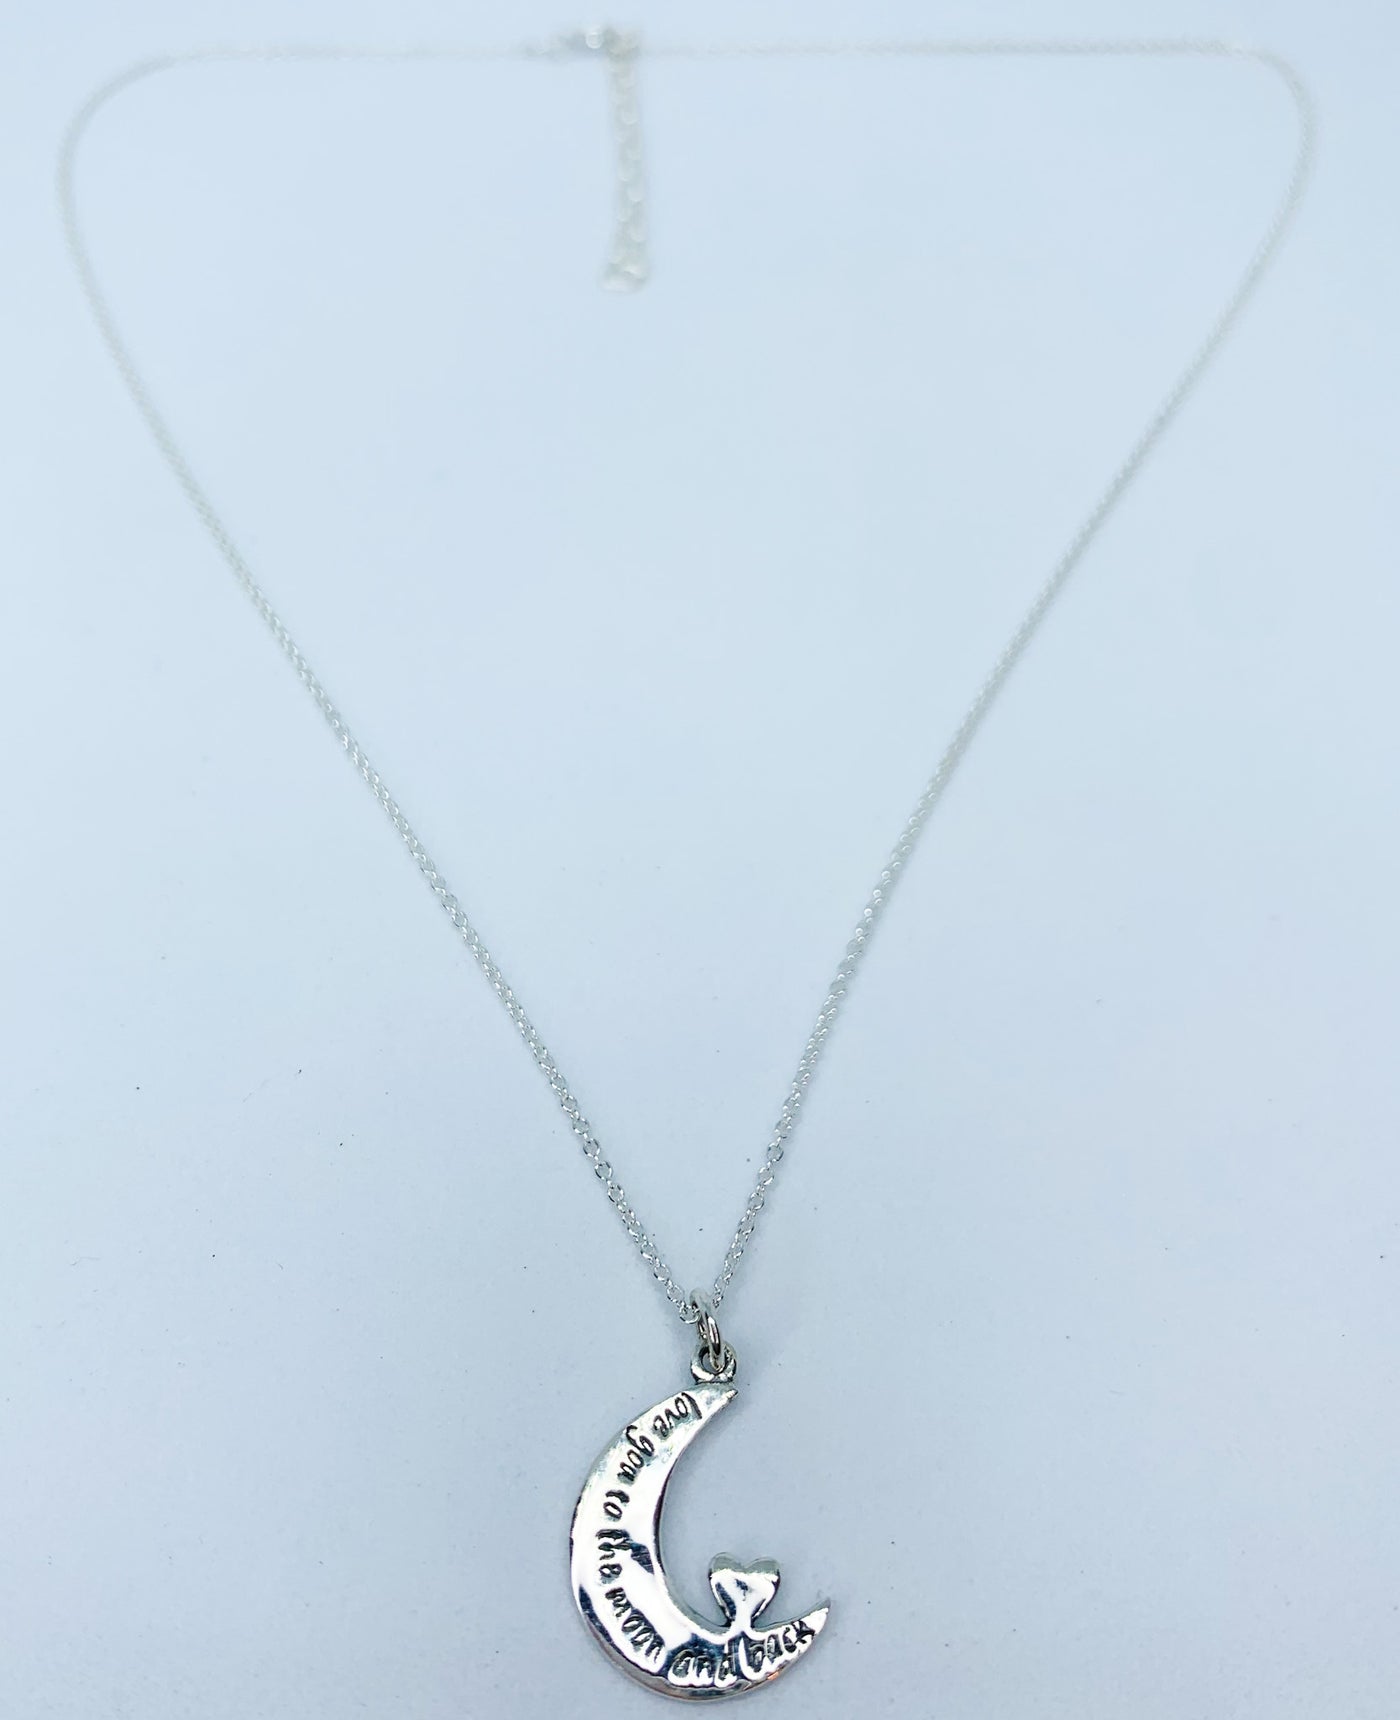 Love You To The Moon Crescent Necklace